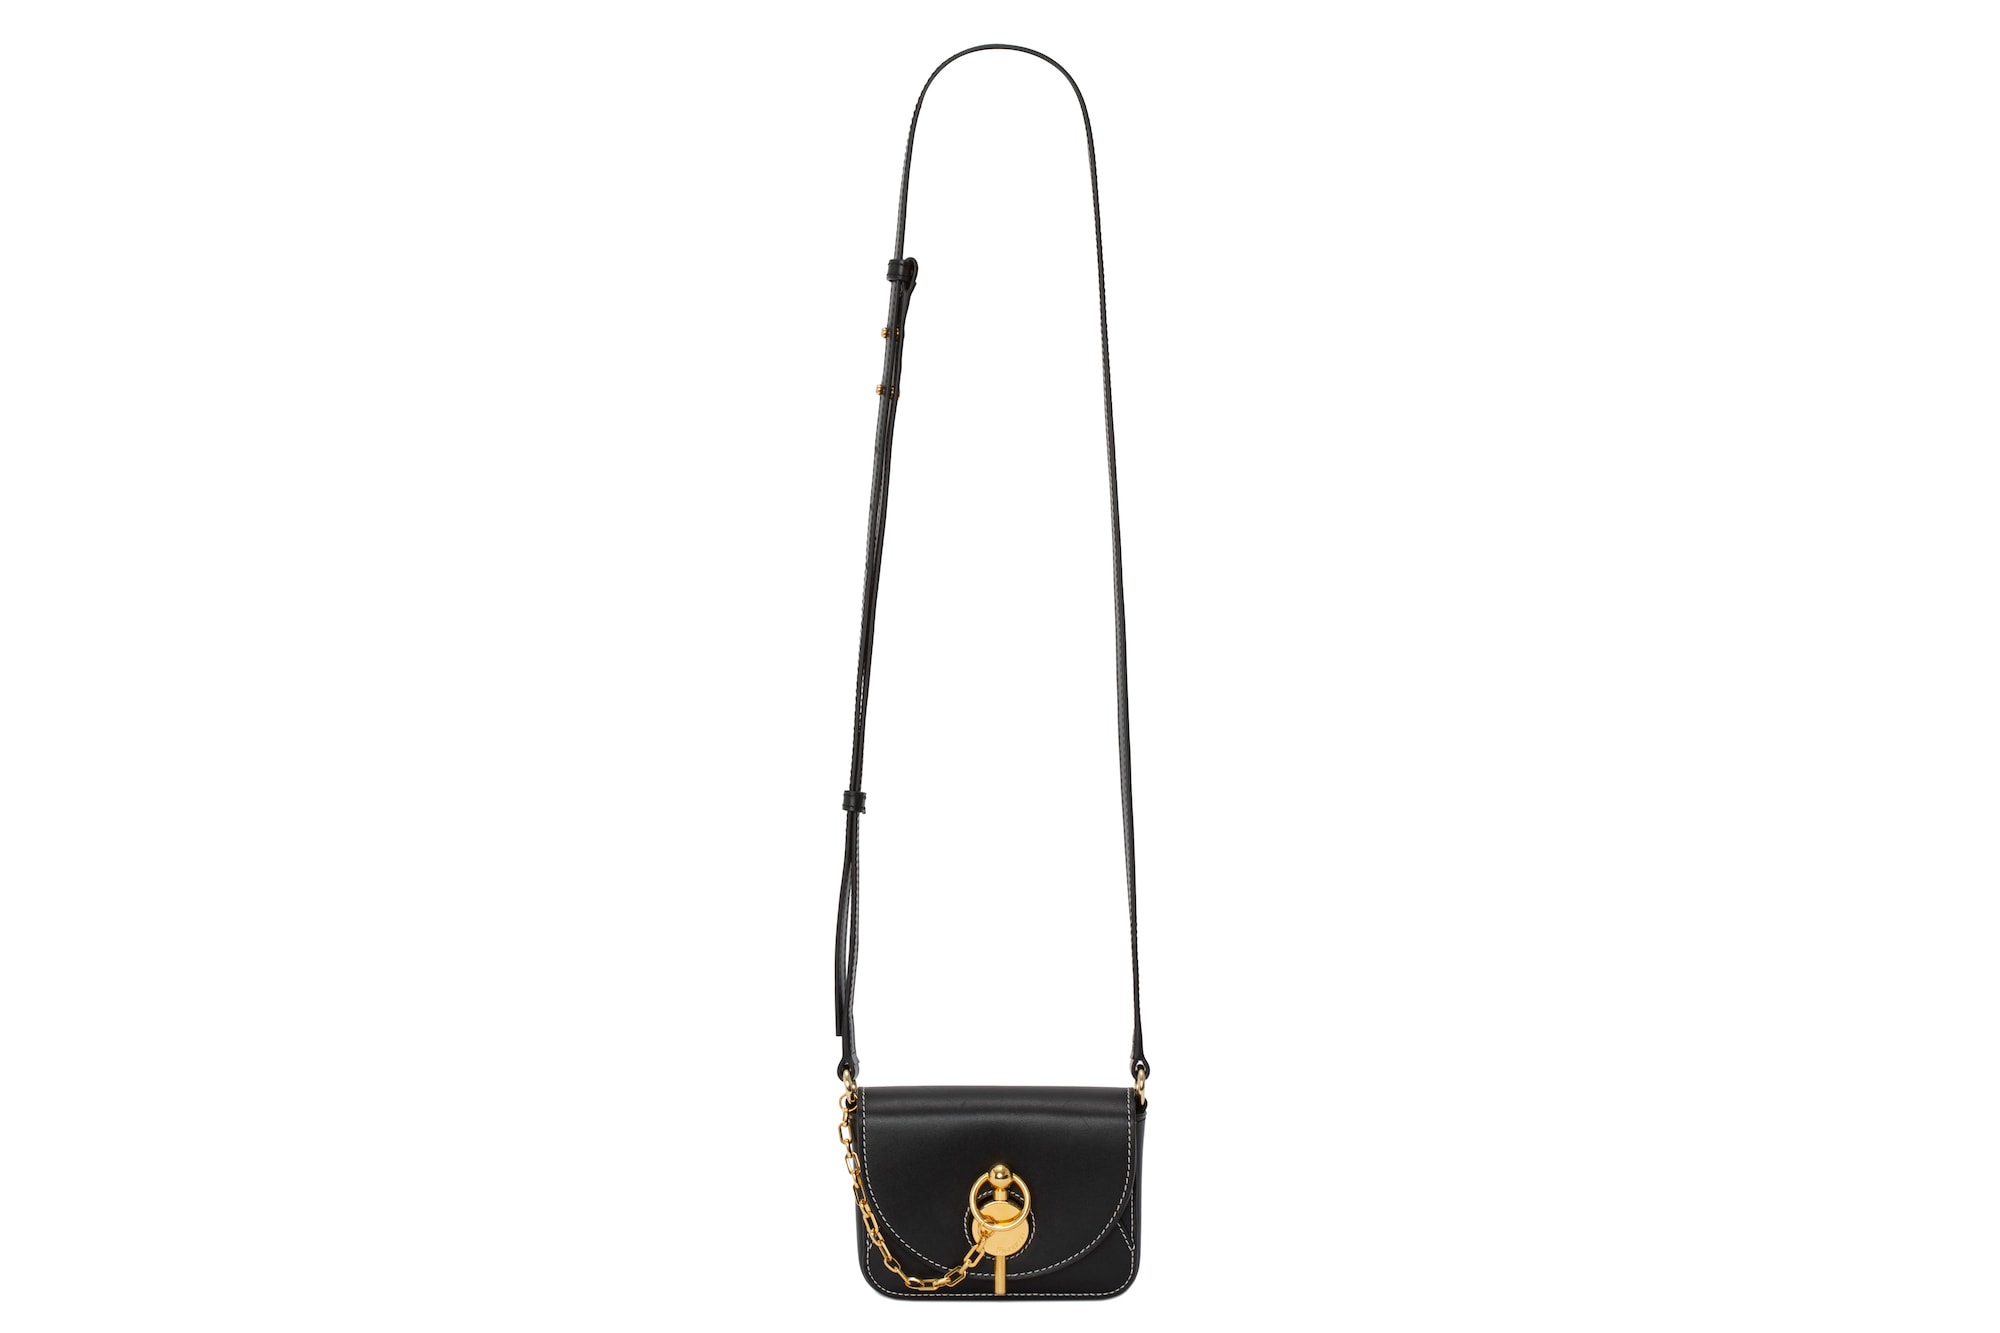 JW Anderson SS19 Spring Summer 2019 KEYTS Bag Release Color Leather Purse Gold Hardware Key Logo Red Yellow Black White Purple